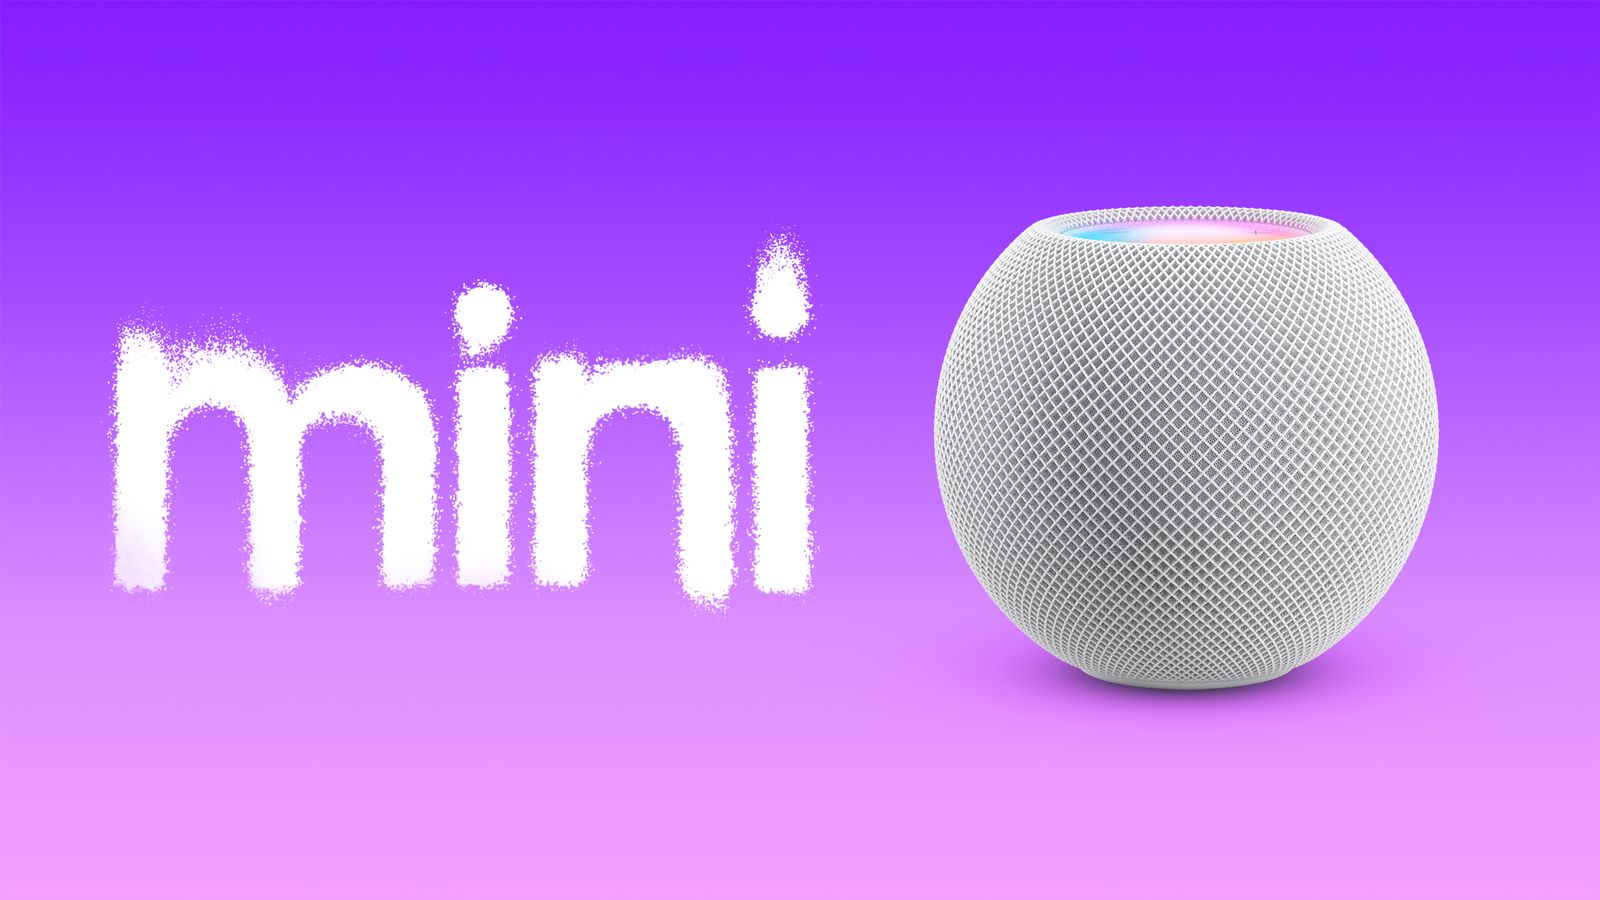 Apple outs $99 HomePod Mini with big sound and Siri smarts -   news